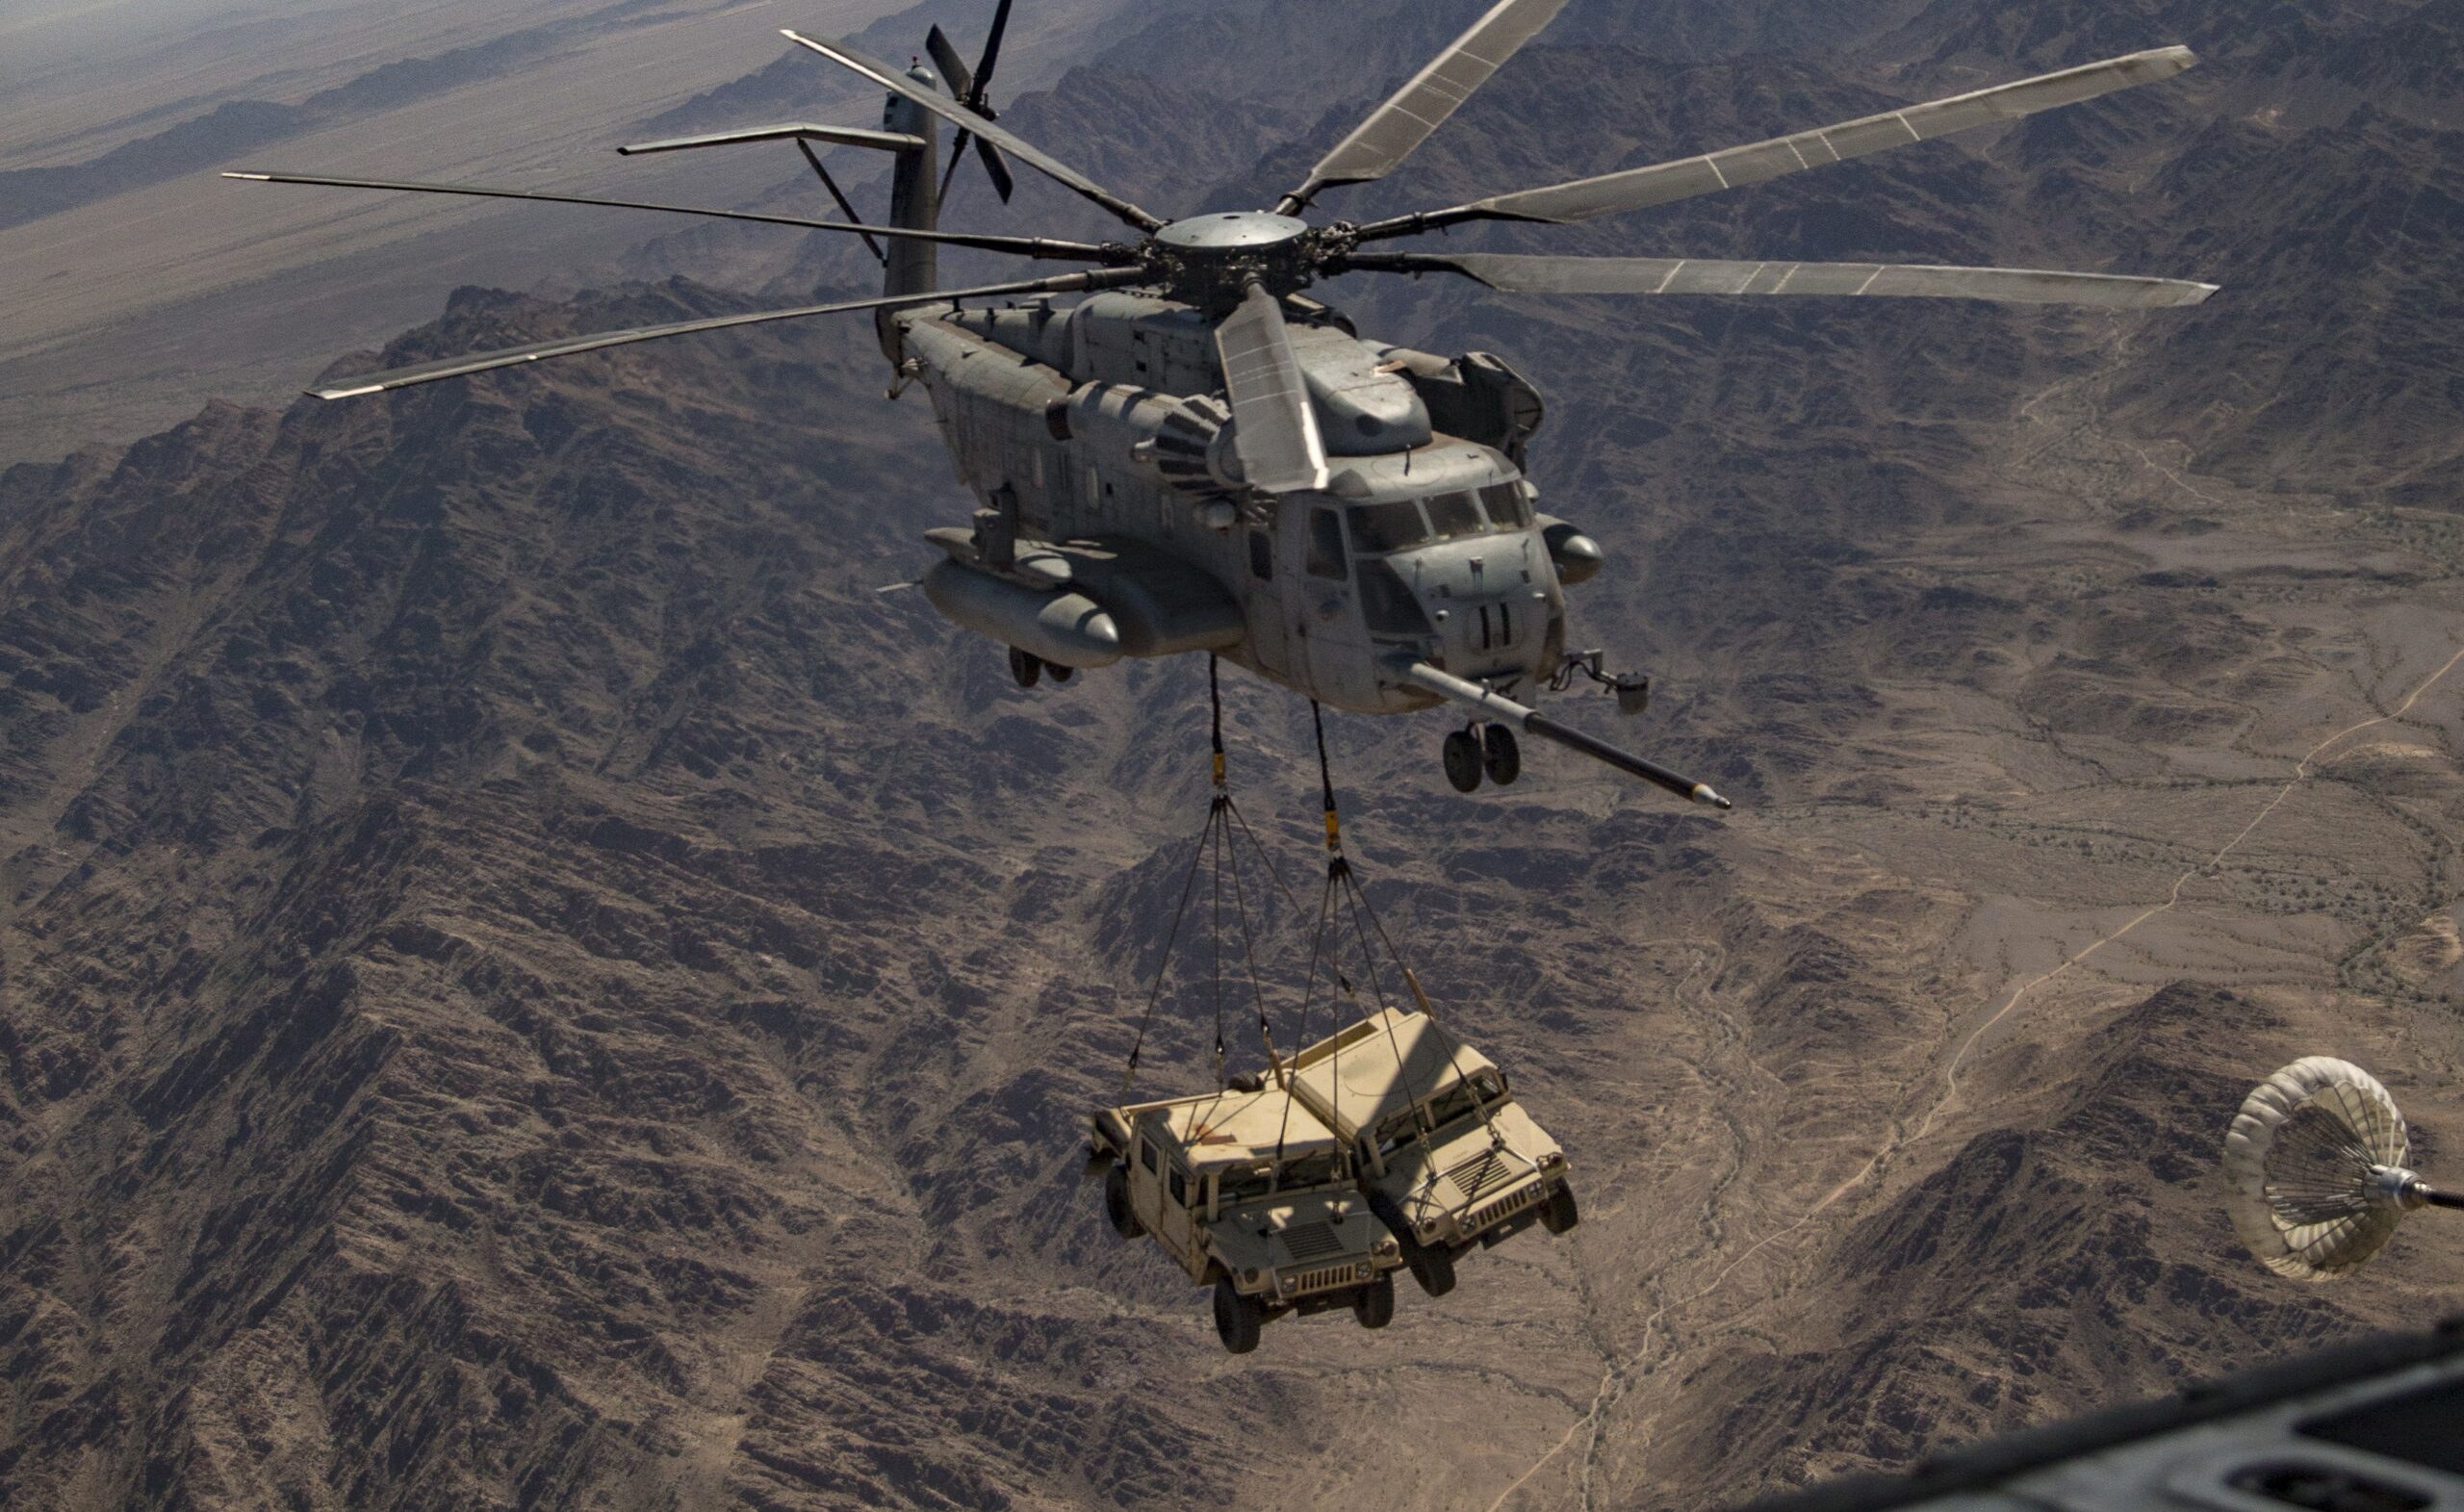 U S Marines Releases Fascinating Video Of Heavy Lifts With Ch 53 Helicopters